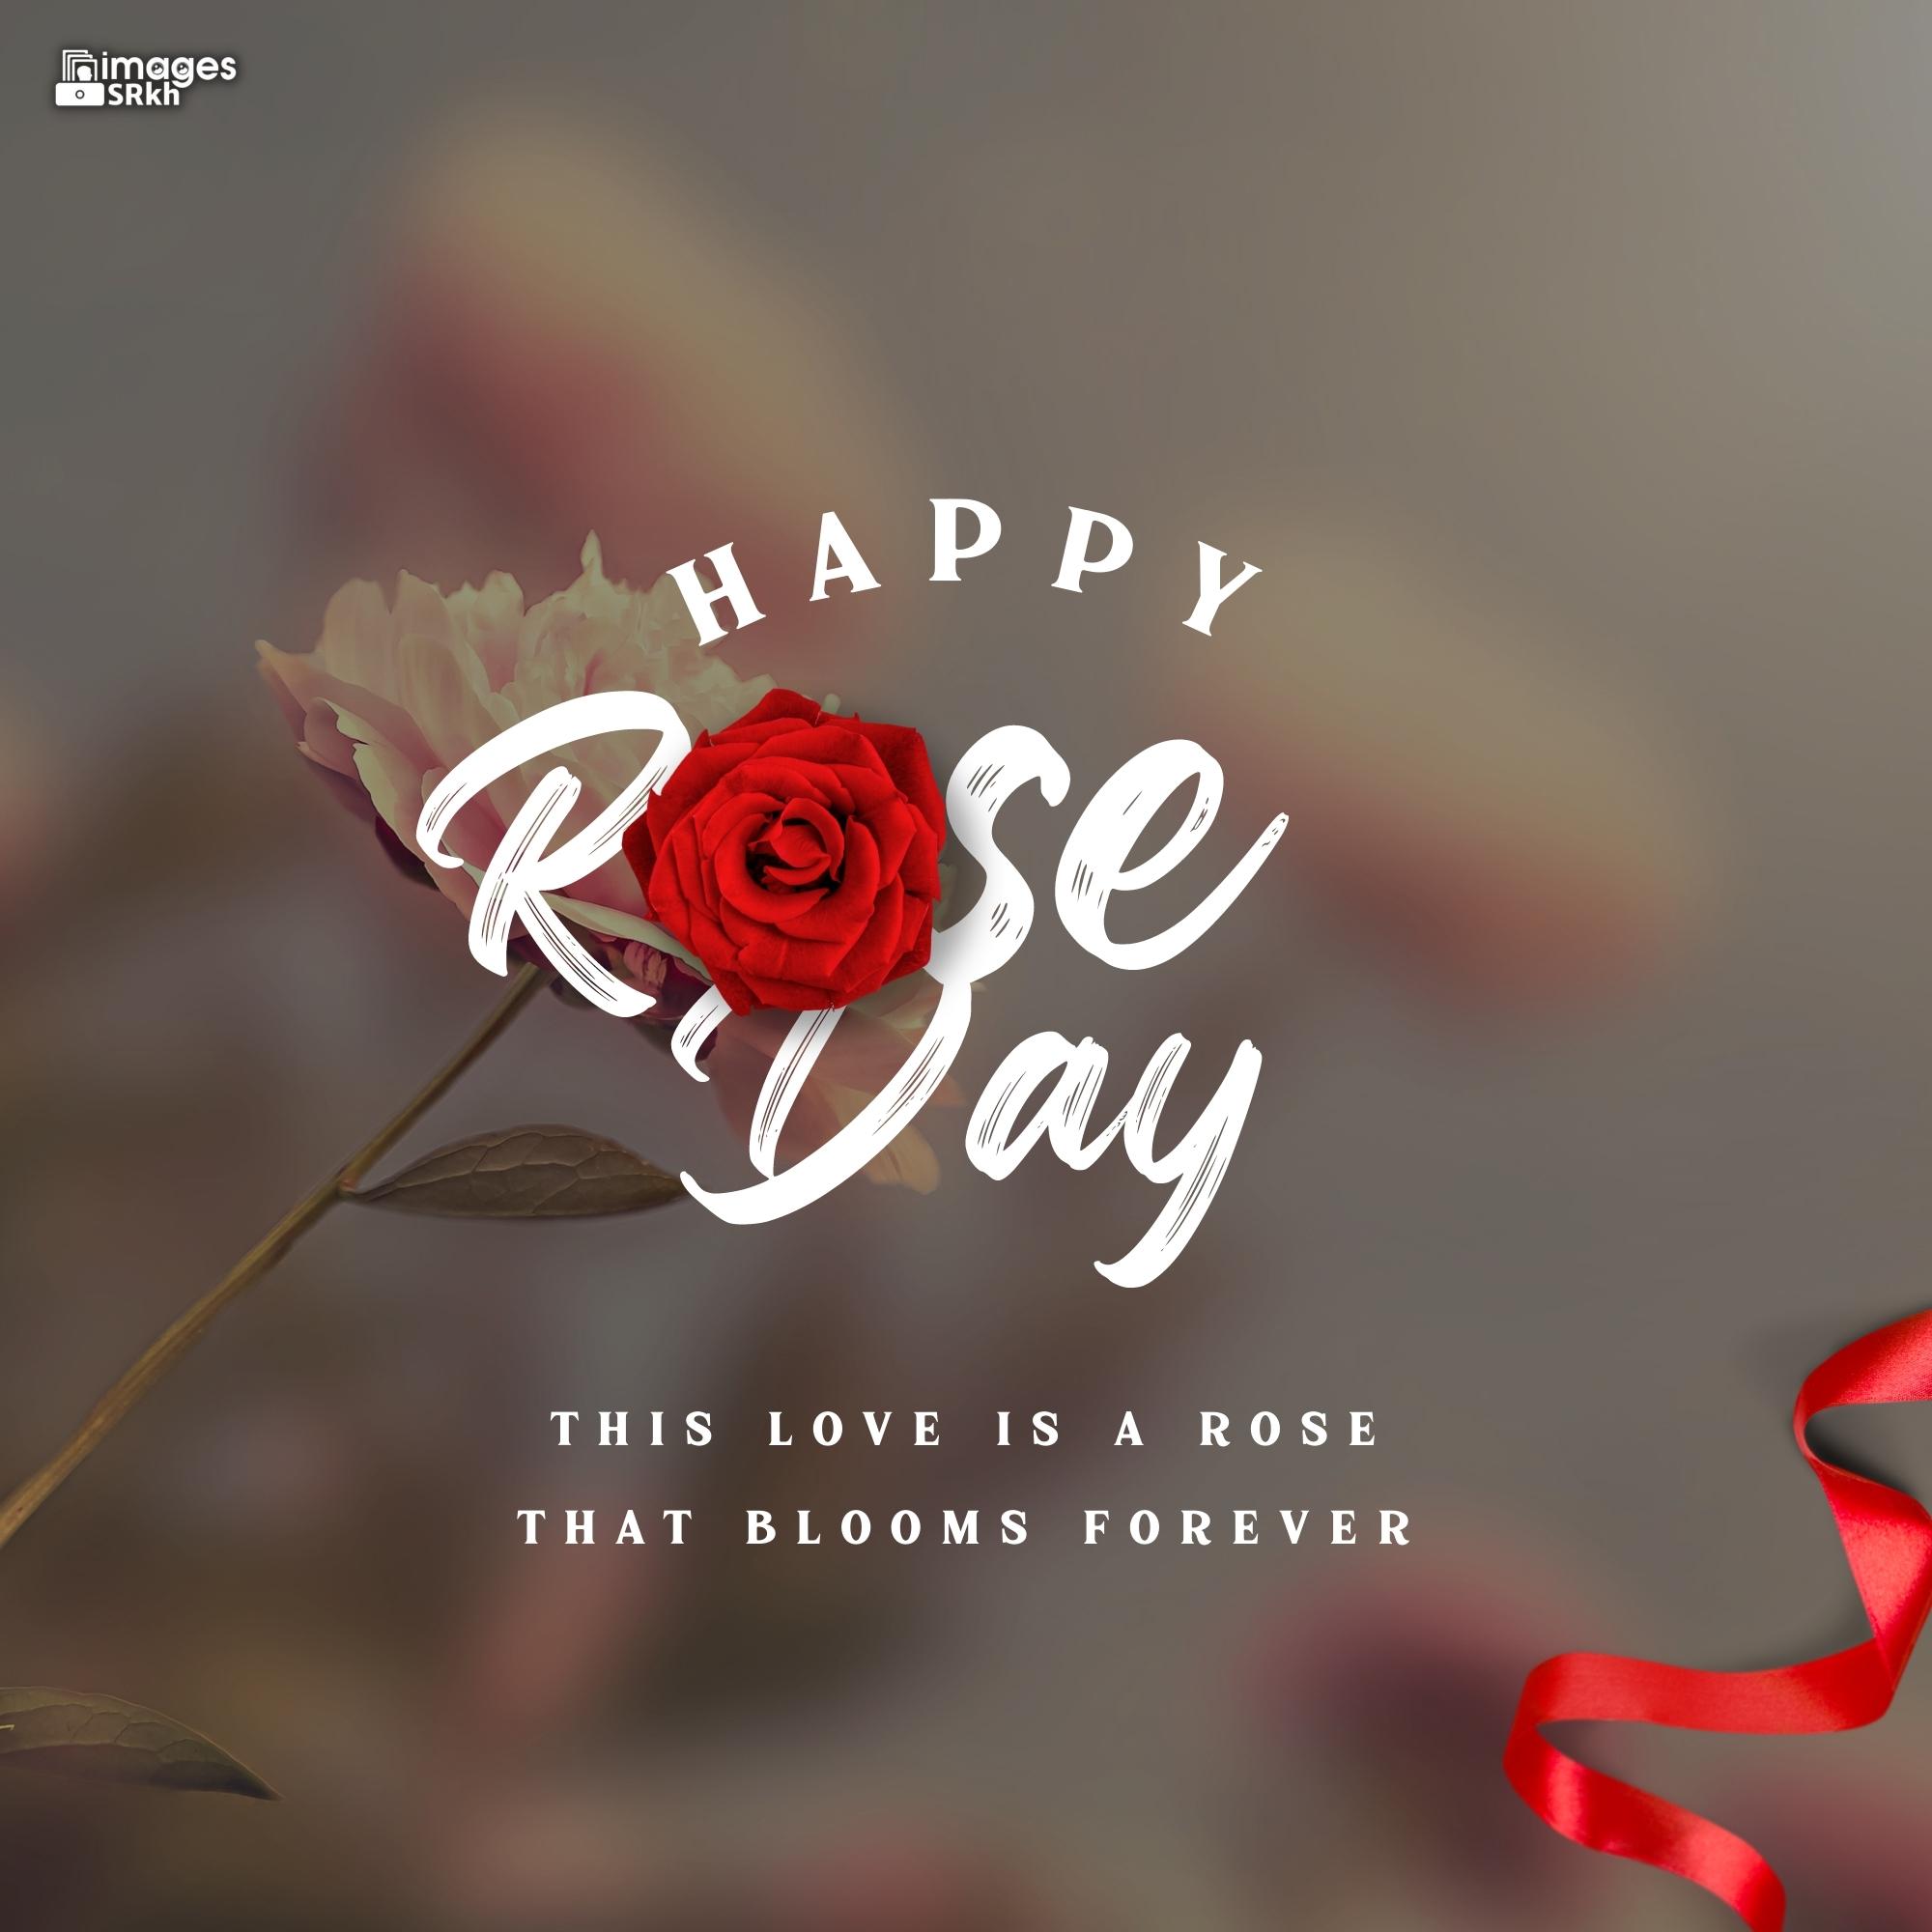 Happy Rose Day Image Hd Download (50)